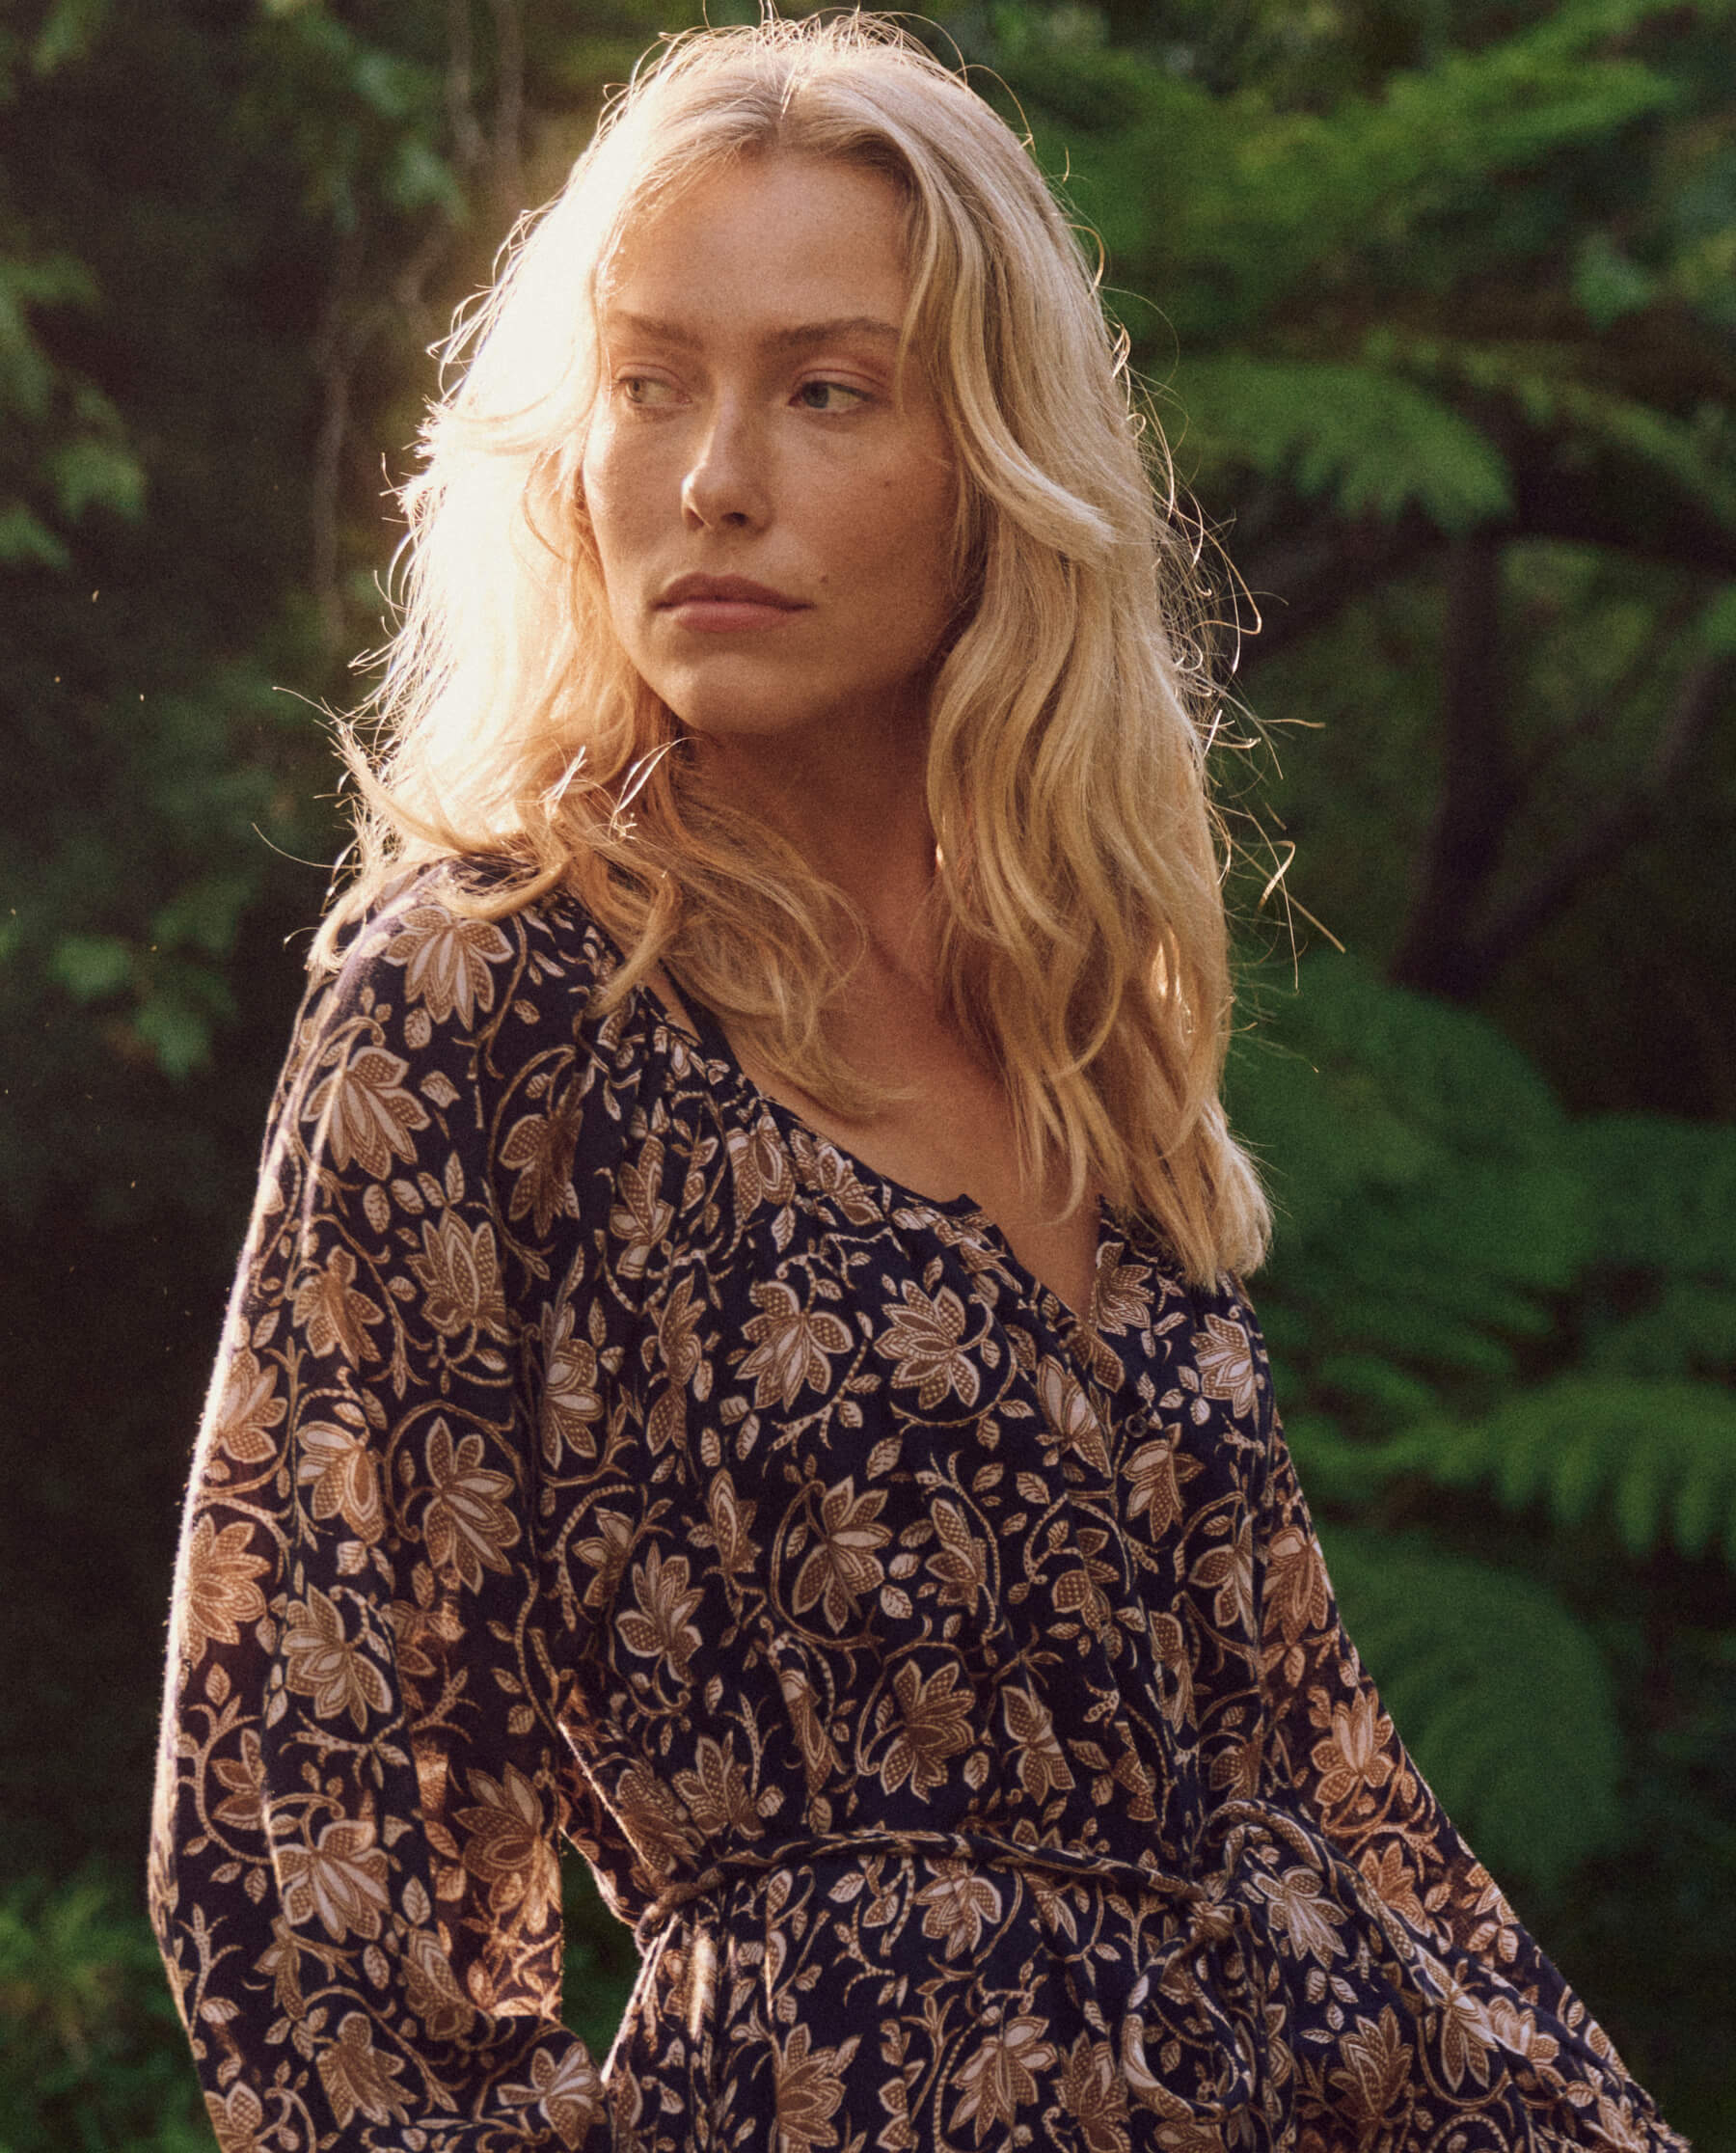 The Shoreline Cover-Up. -- Black Oasis Floral COVER-UP DRESSES THE GREAT. SP24 SWIM